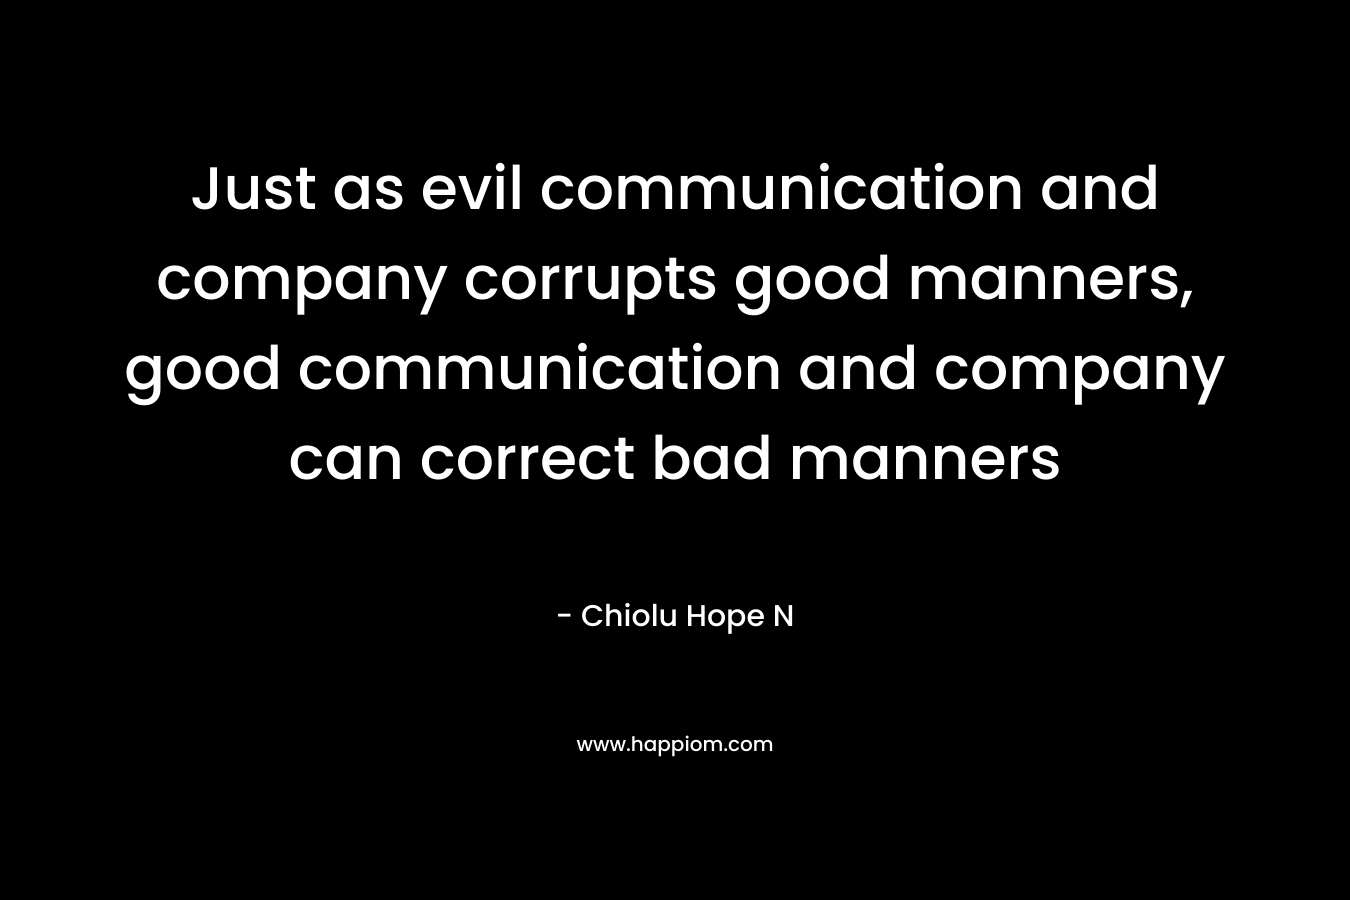 Just as evil communication and company corrupts good manners, good communication and company can correct bad manners